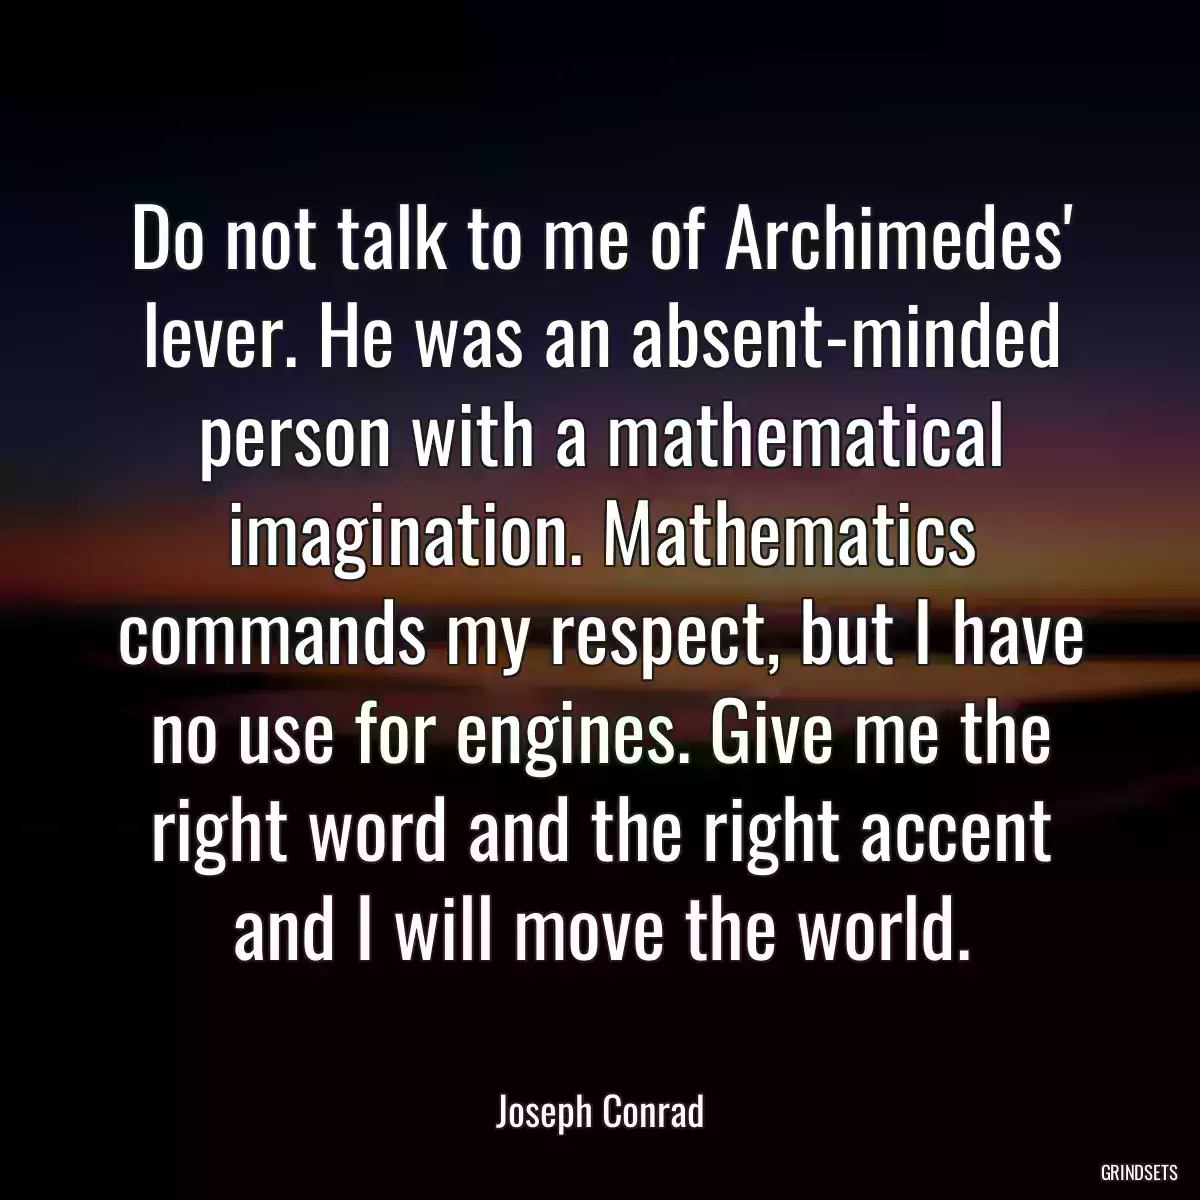 Do not talk to me of Archimedes\' lever. He was an absent-minded person with a mathematical imagination. Mathematics commands my respect, but I have no use for engines. Give me the right word and the right accent and I will move the world.